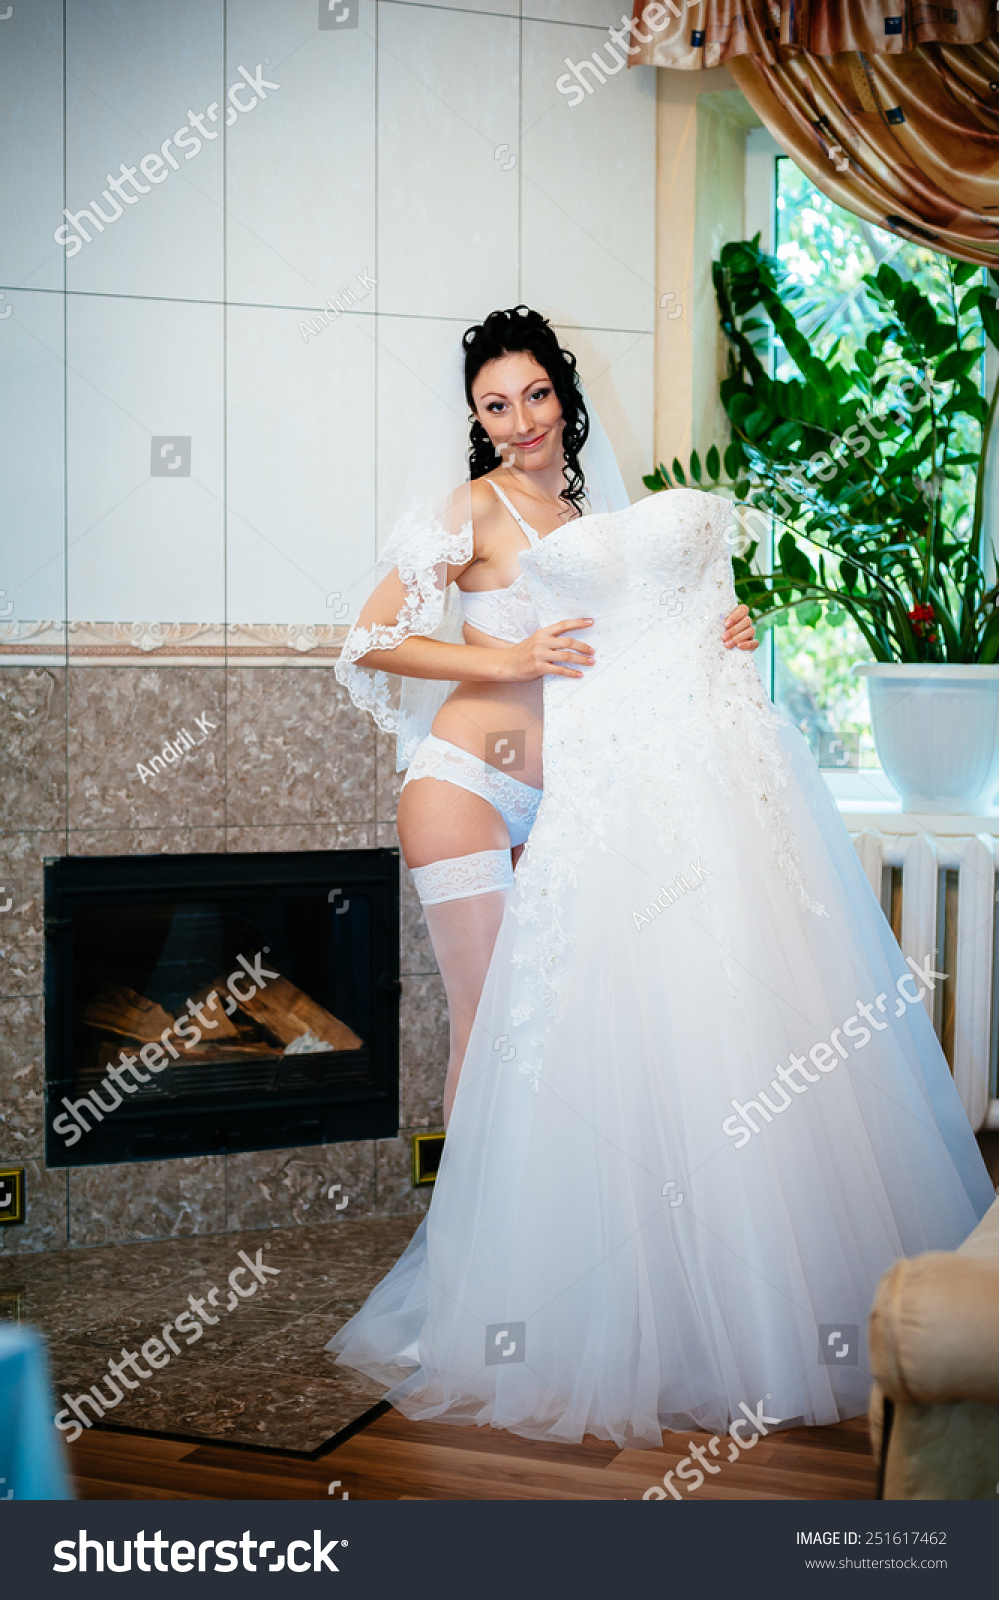 To Play Beautiful Bride 34